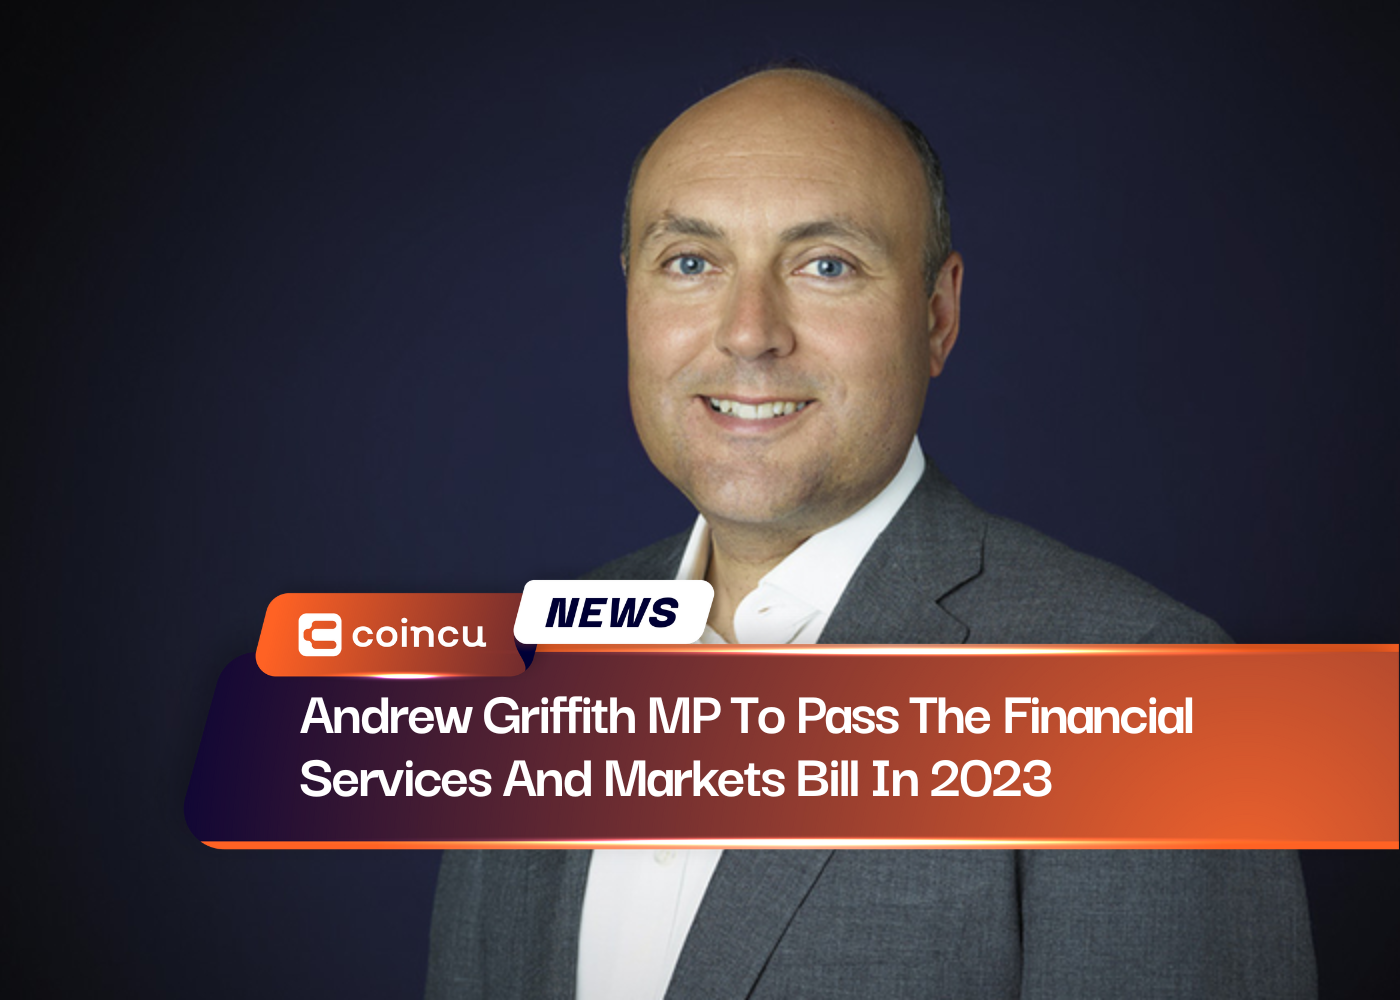 Andrew Griffith MP To Pass The Financial Services And Markets Bill In 2023